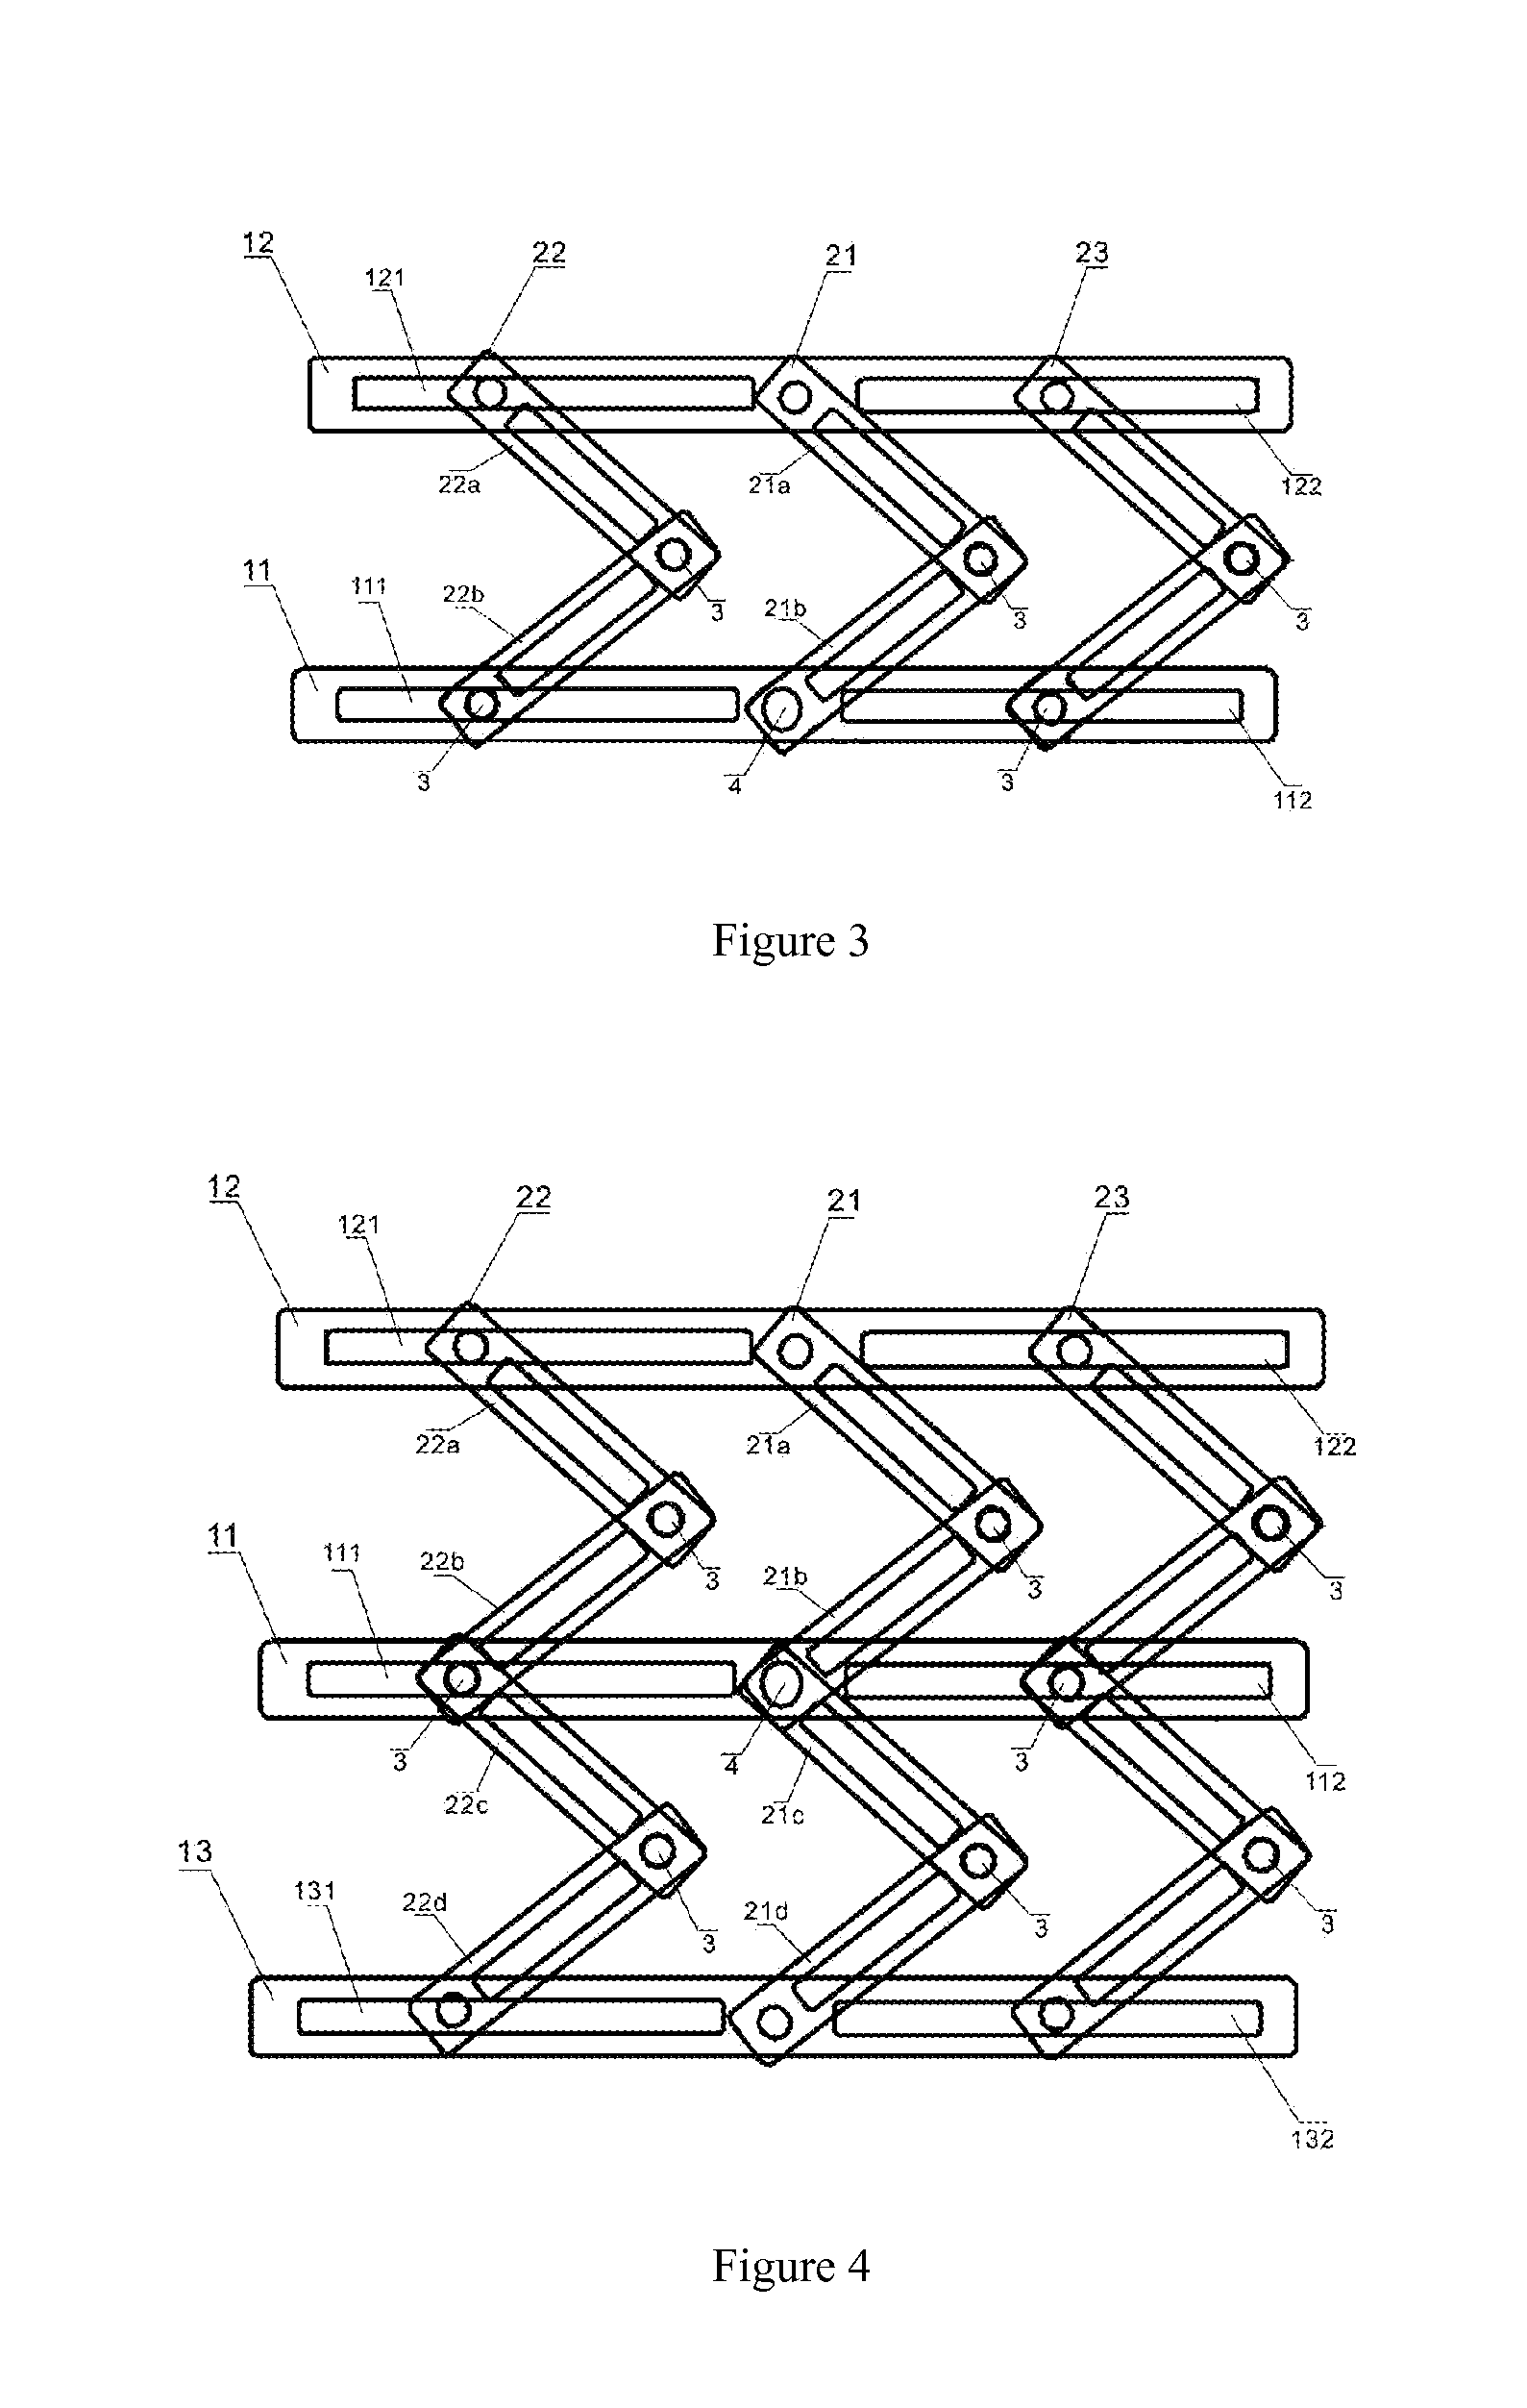 Pressure point inspection device